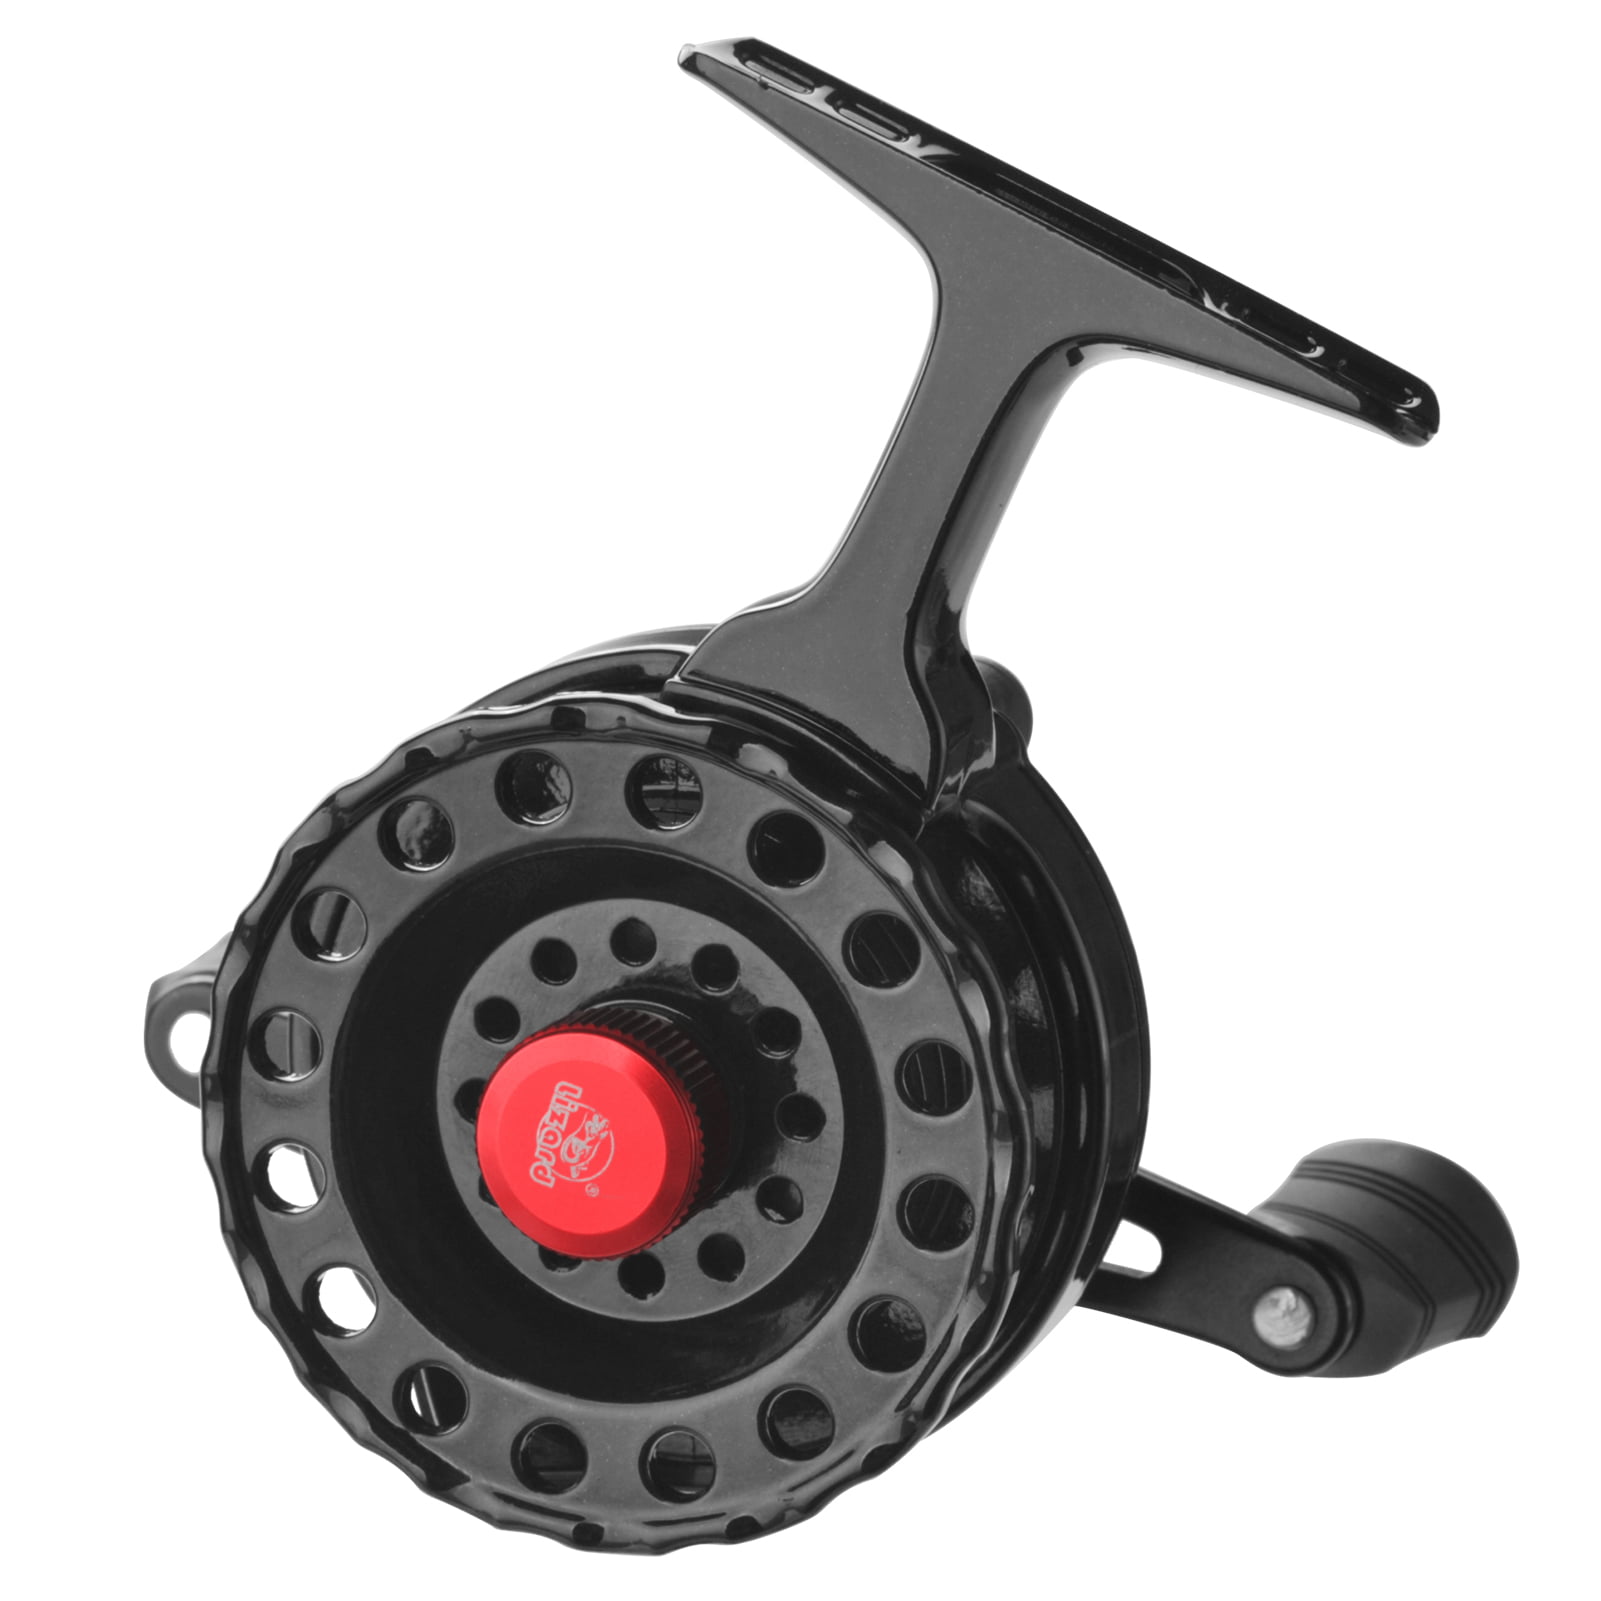 N/A multi Frabill 3169075-SSI Frabill Straight Line 371 Ice Fishing Reel in Clamshell Pack